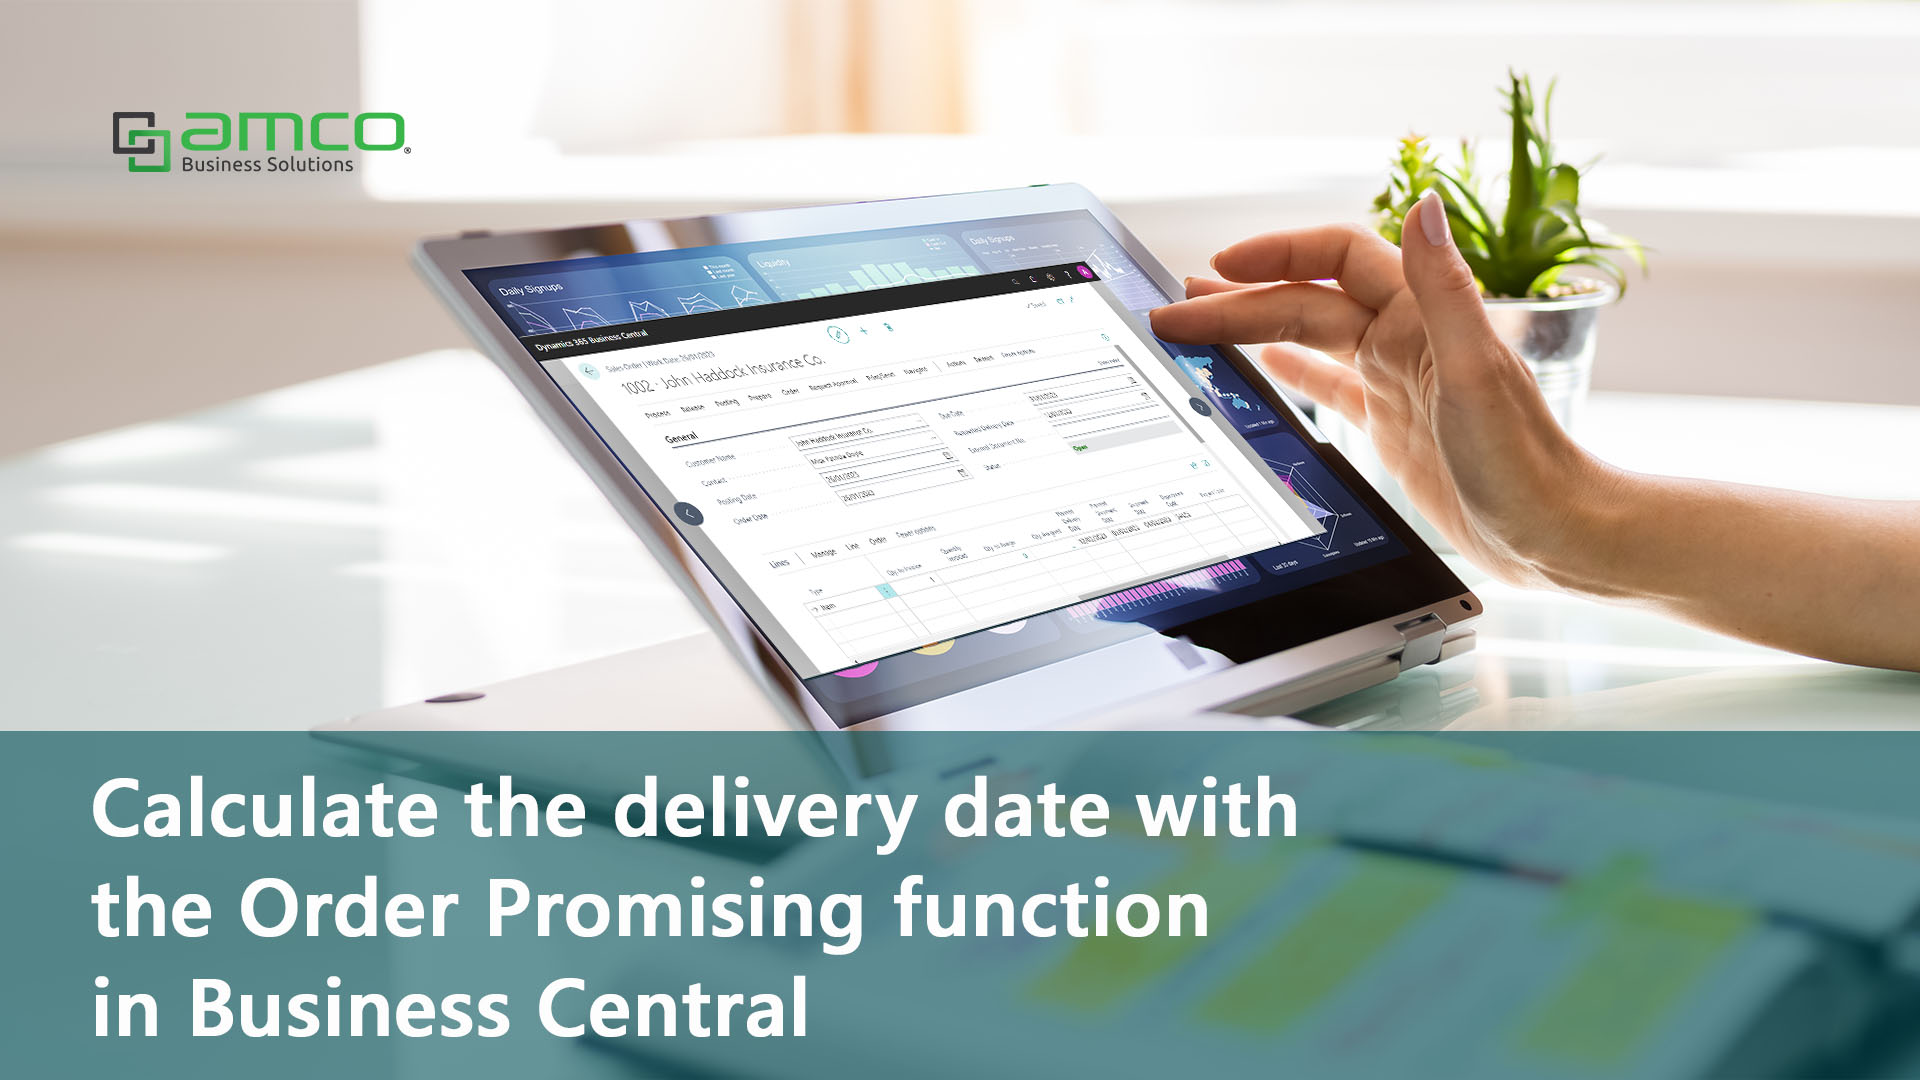 Calculate the delivery date with the Order Promising function in Business Central